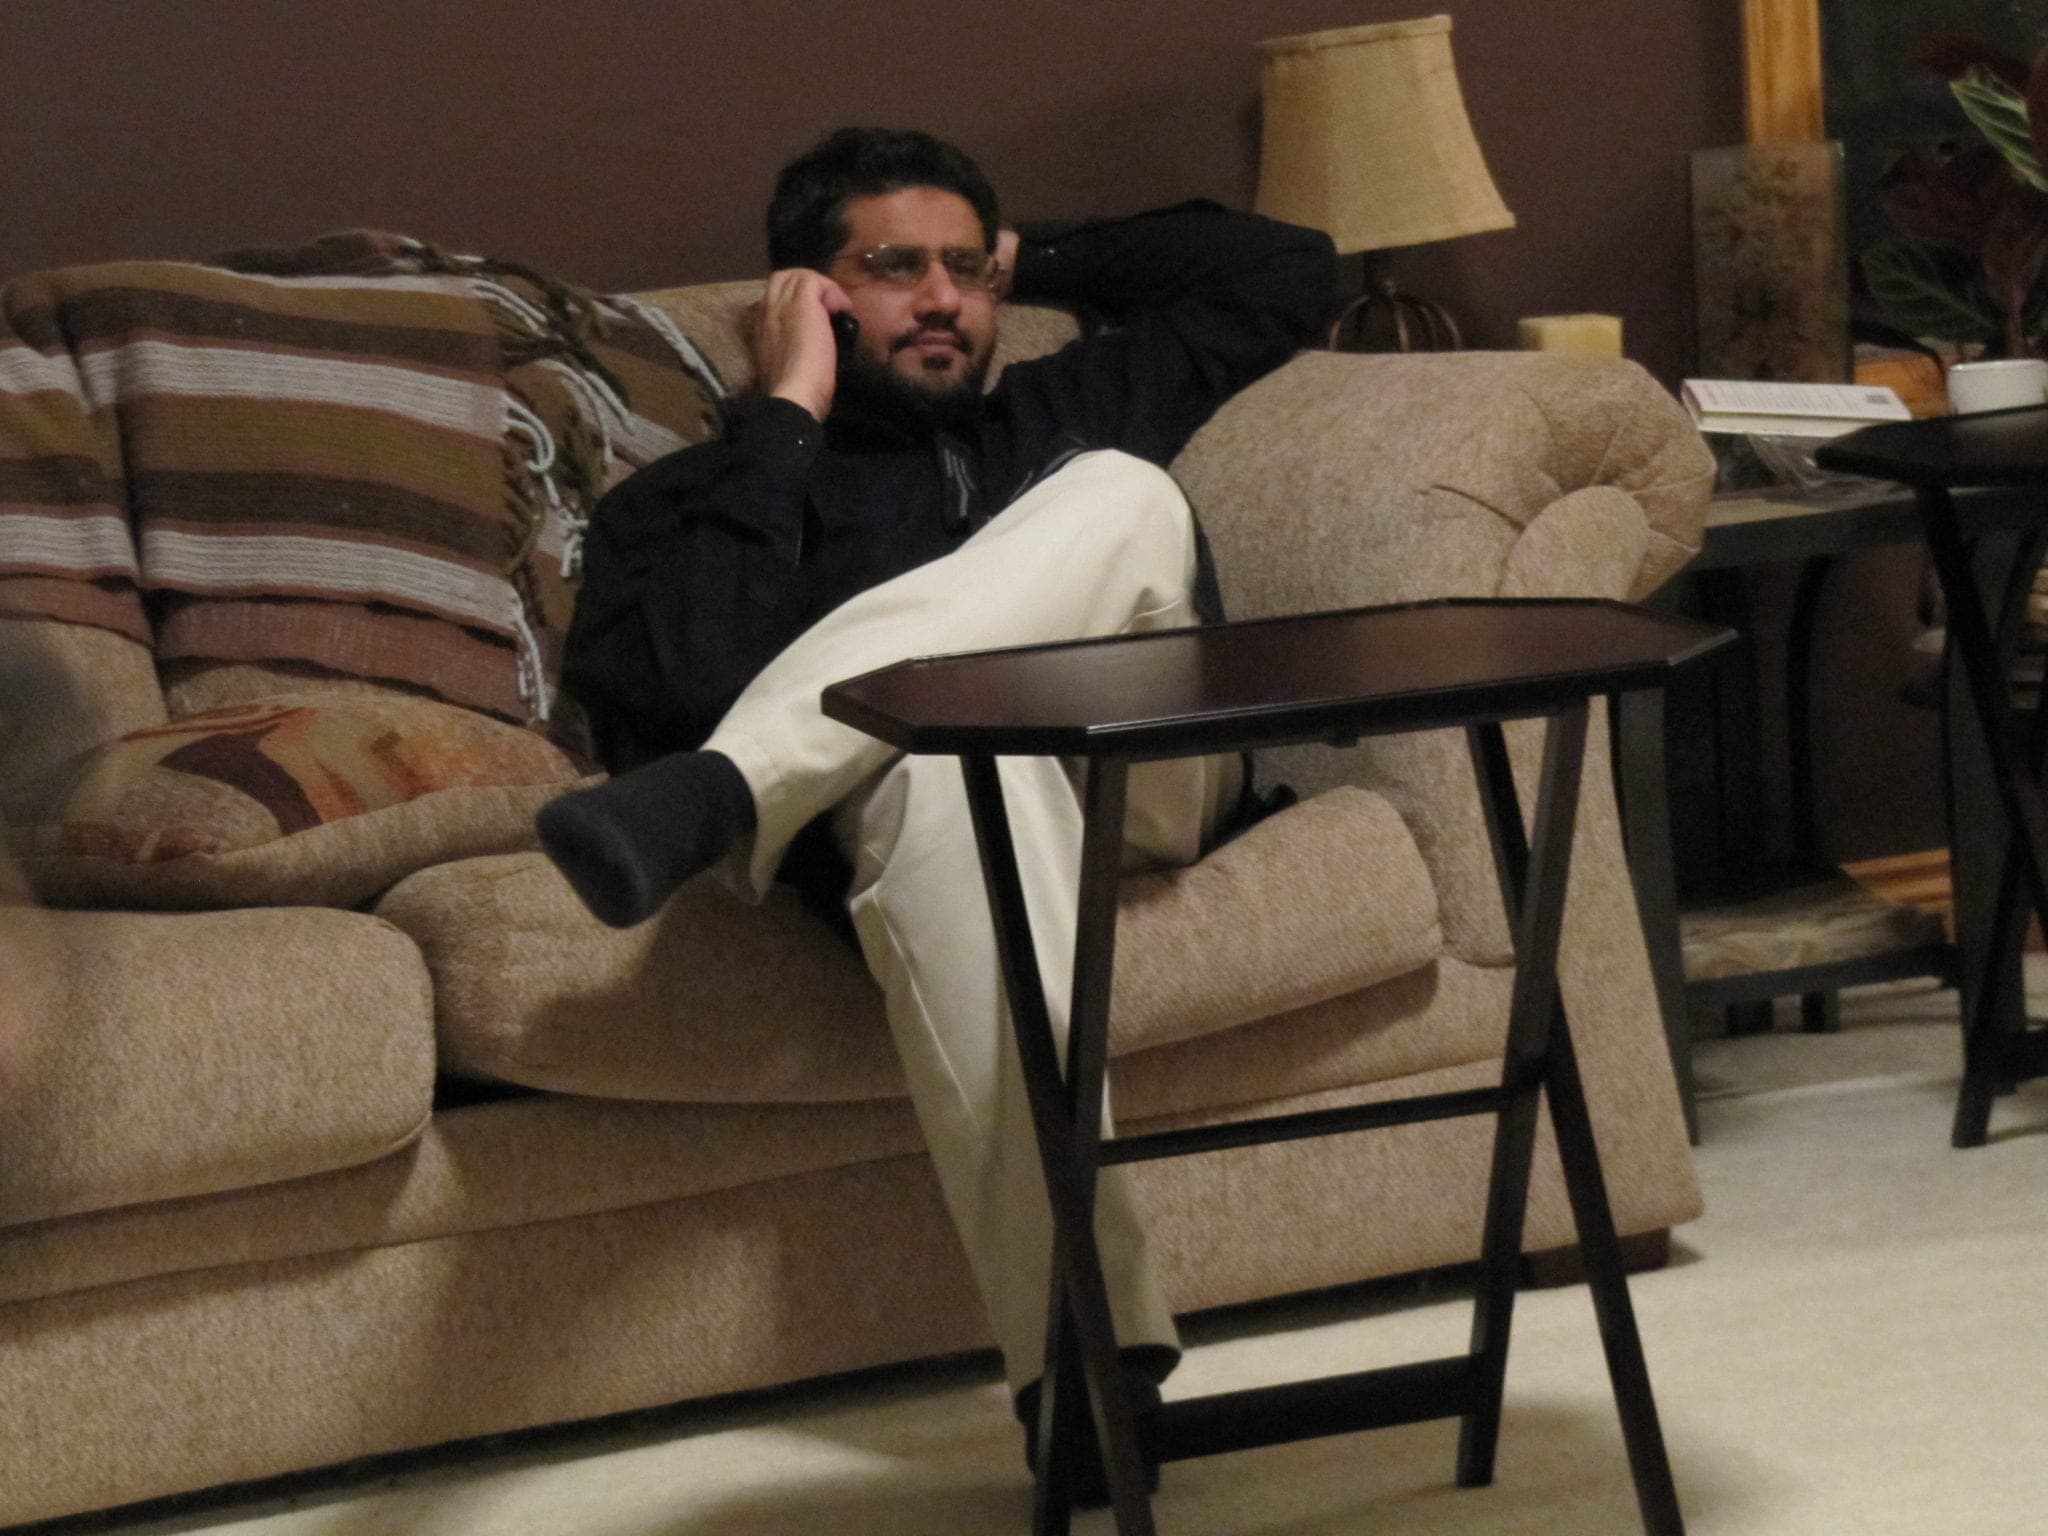 Shaykh Omar Qureshi on the phone as we were getting ready to leave for dinner